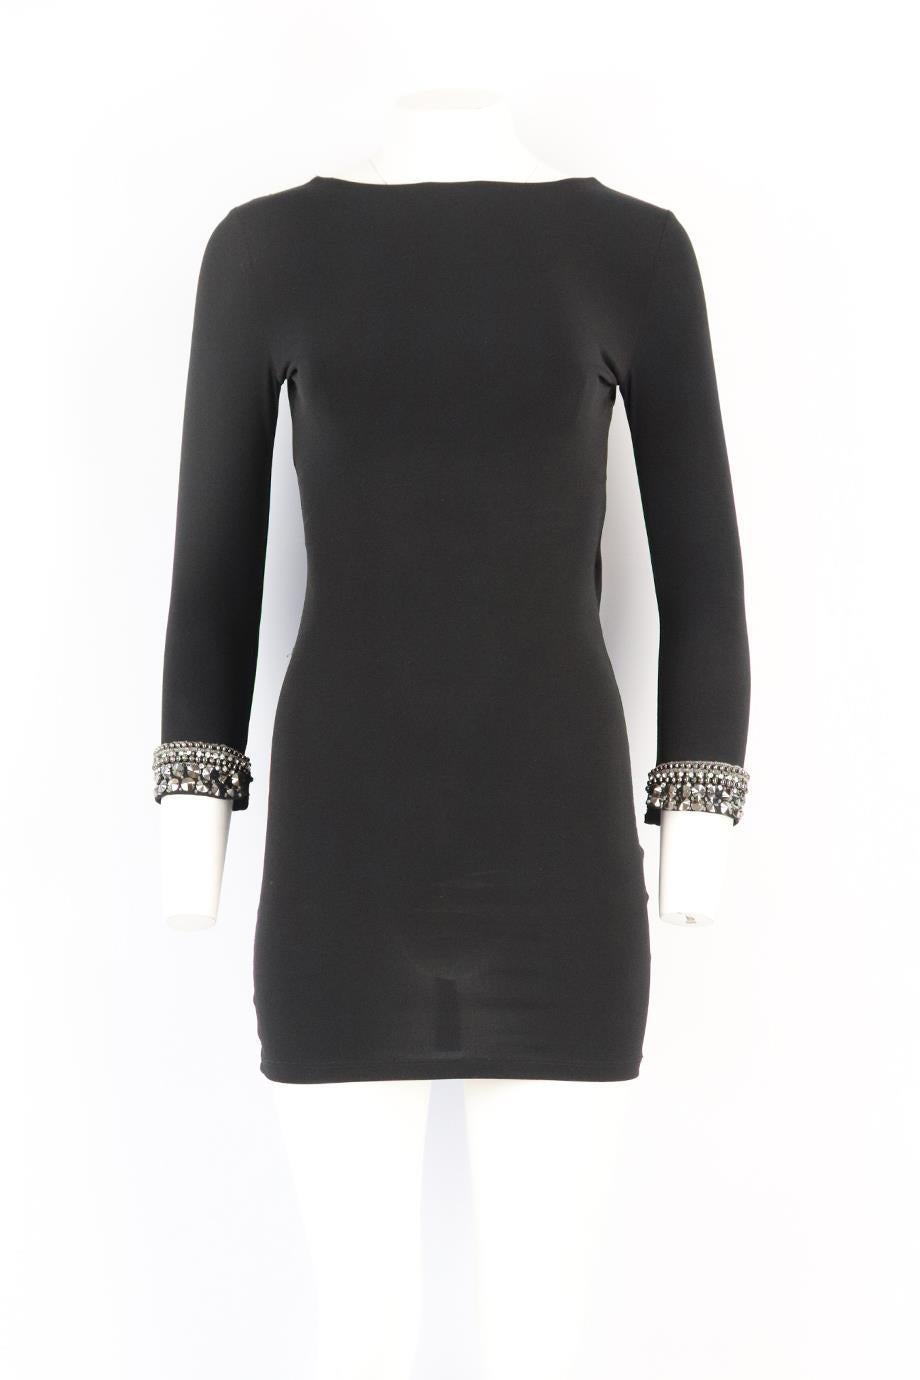 Philipp Plein open back embellished ruched stretch jersey mini dress. Black. Long sleeve, boat neck. 100% Polyester. Size: XSmall (UK 6, US 2, FR 34, IT 38). Bust: 32 in. Waist: 24 in. Hips: 29 in. Length: 32 in. Very good condition - Light signs of